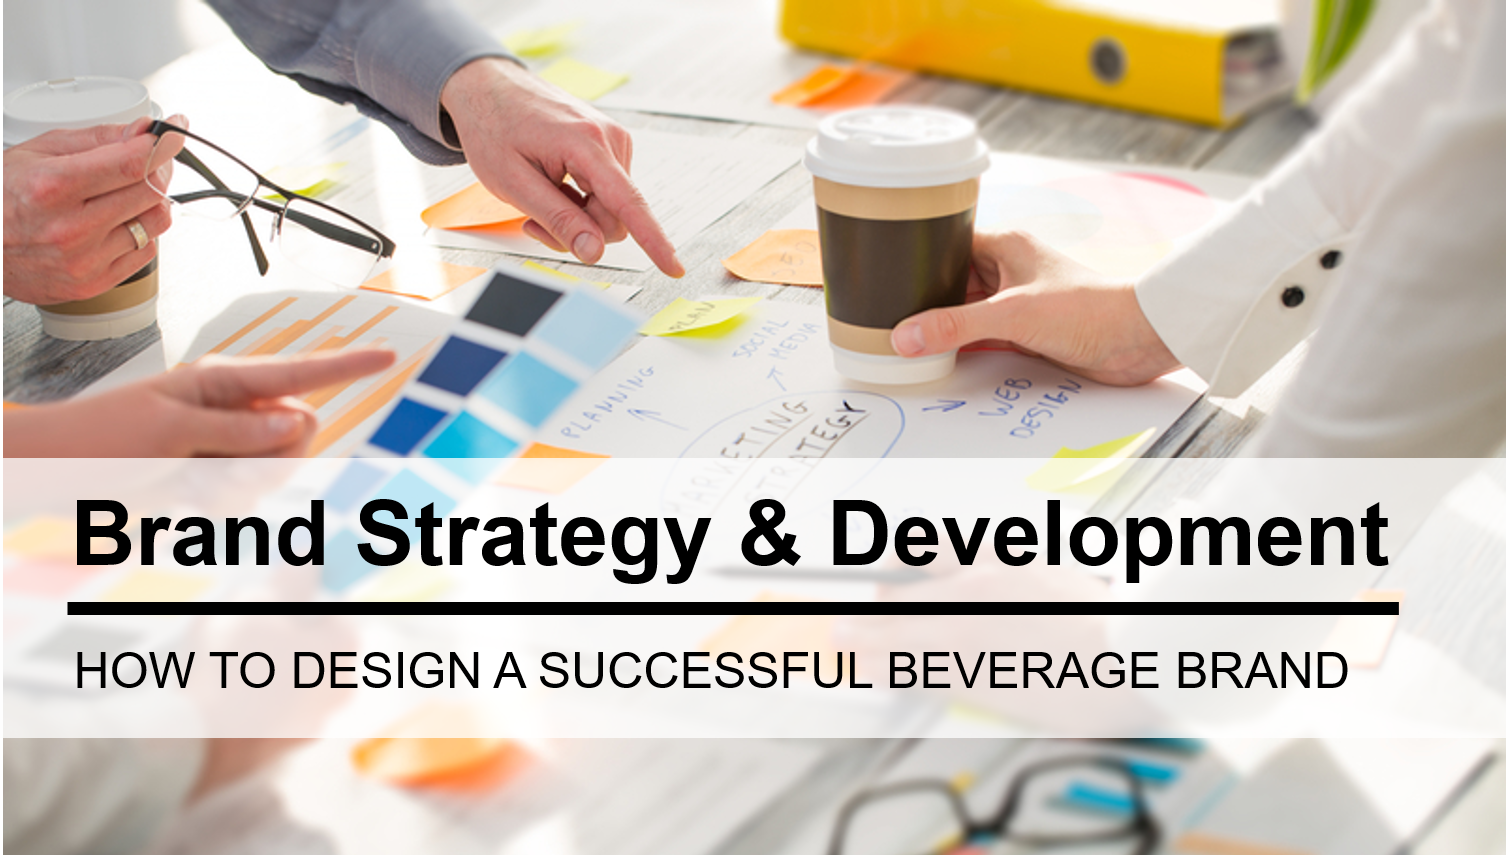 How To Design A Successful Beverage Brand